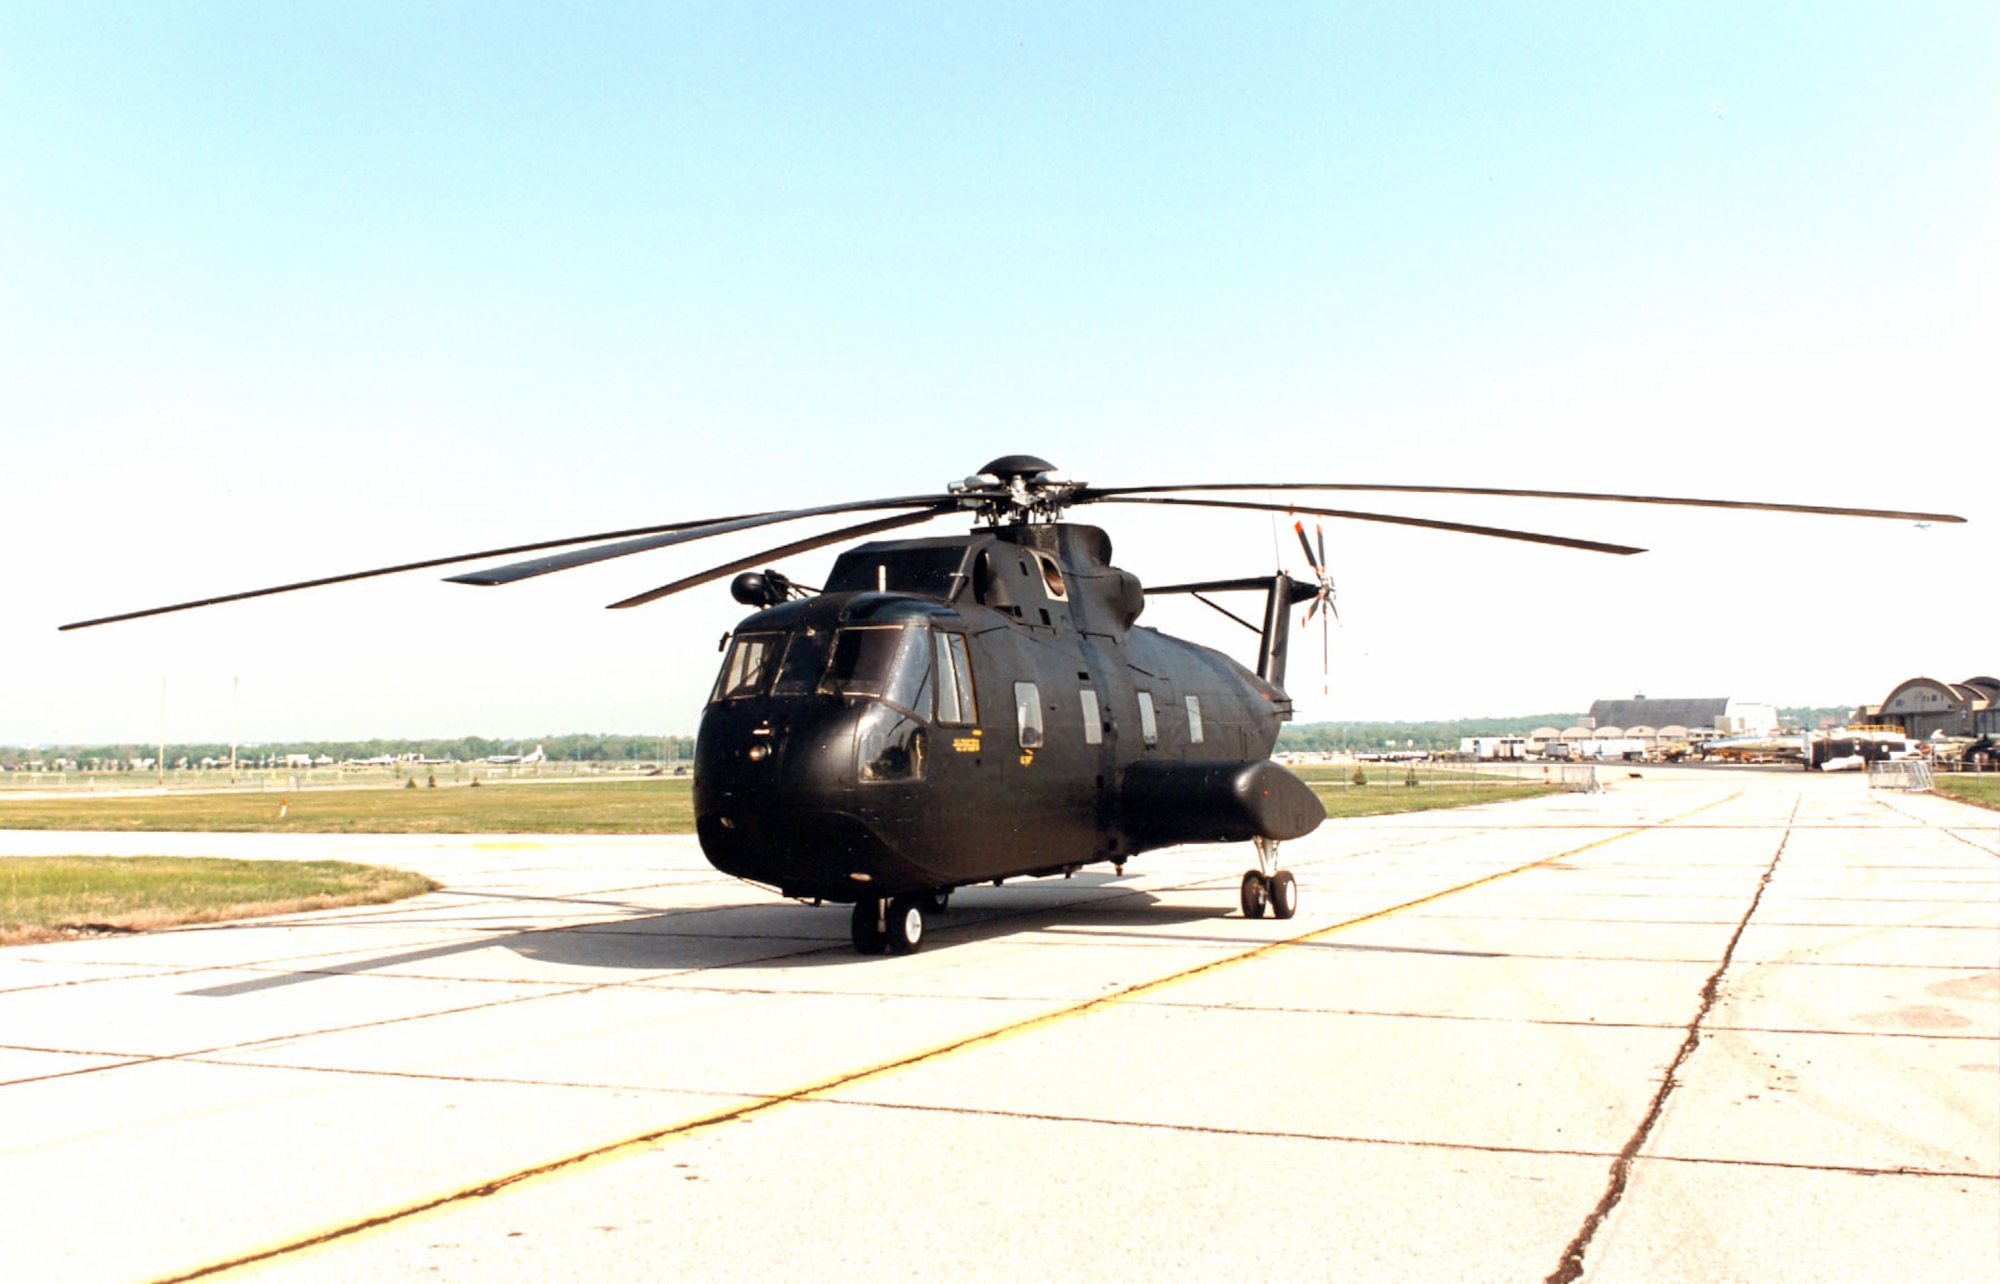 DAYTON, Ohio -- Sikorsky CH-3E at the National Museum of the United States Air Force. (U.S. Air Force photo)